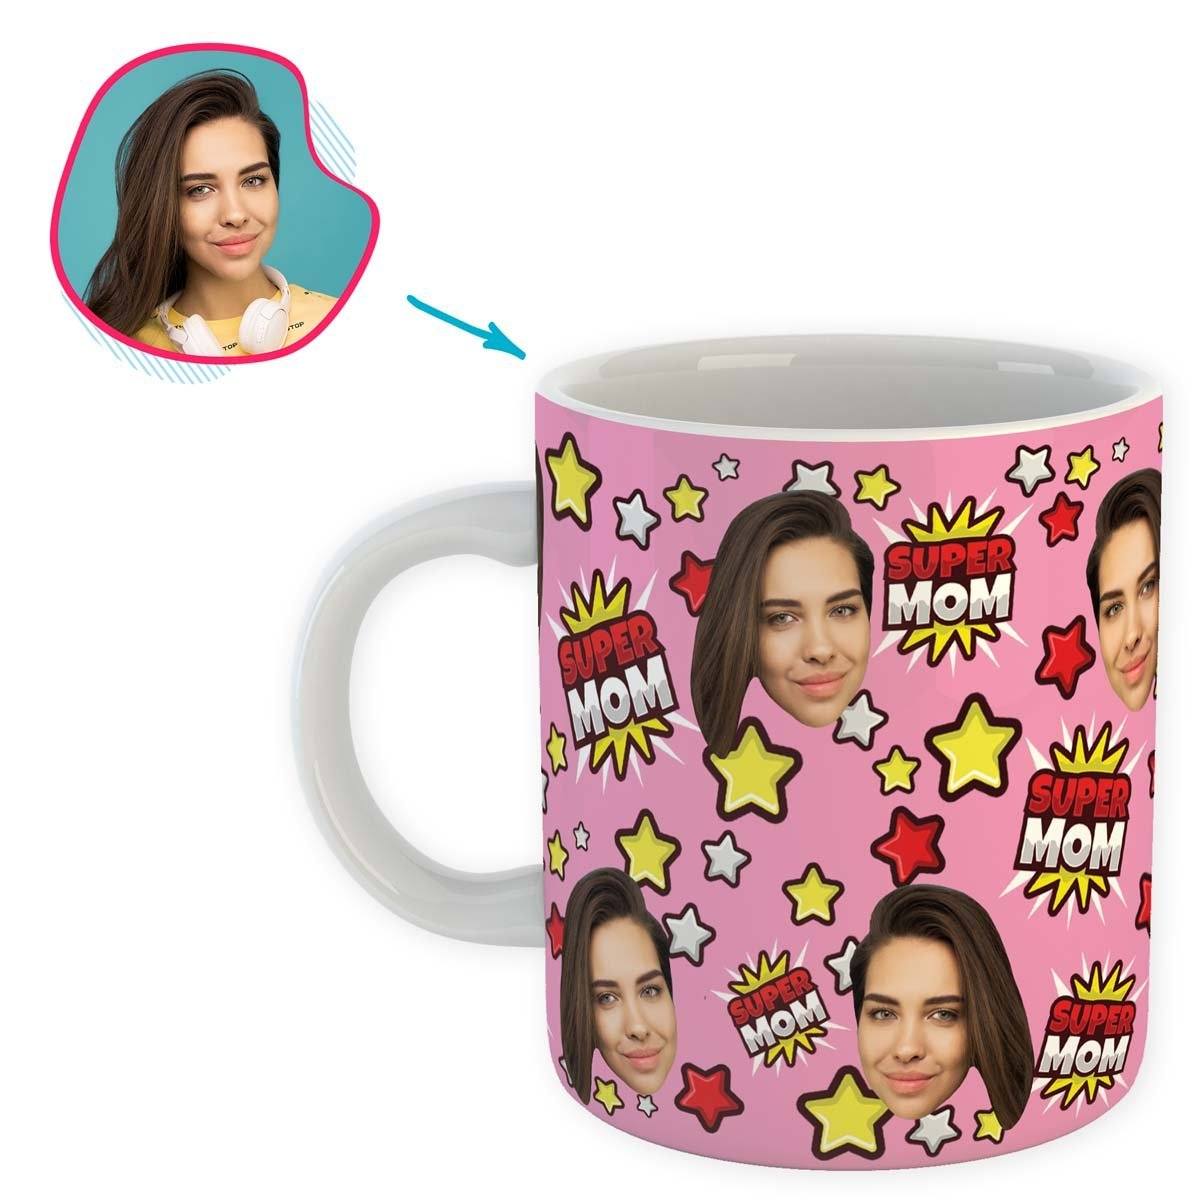 pink Super Mom mug personalized with photo of face printed on it